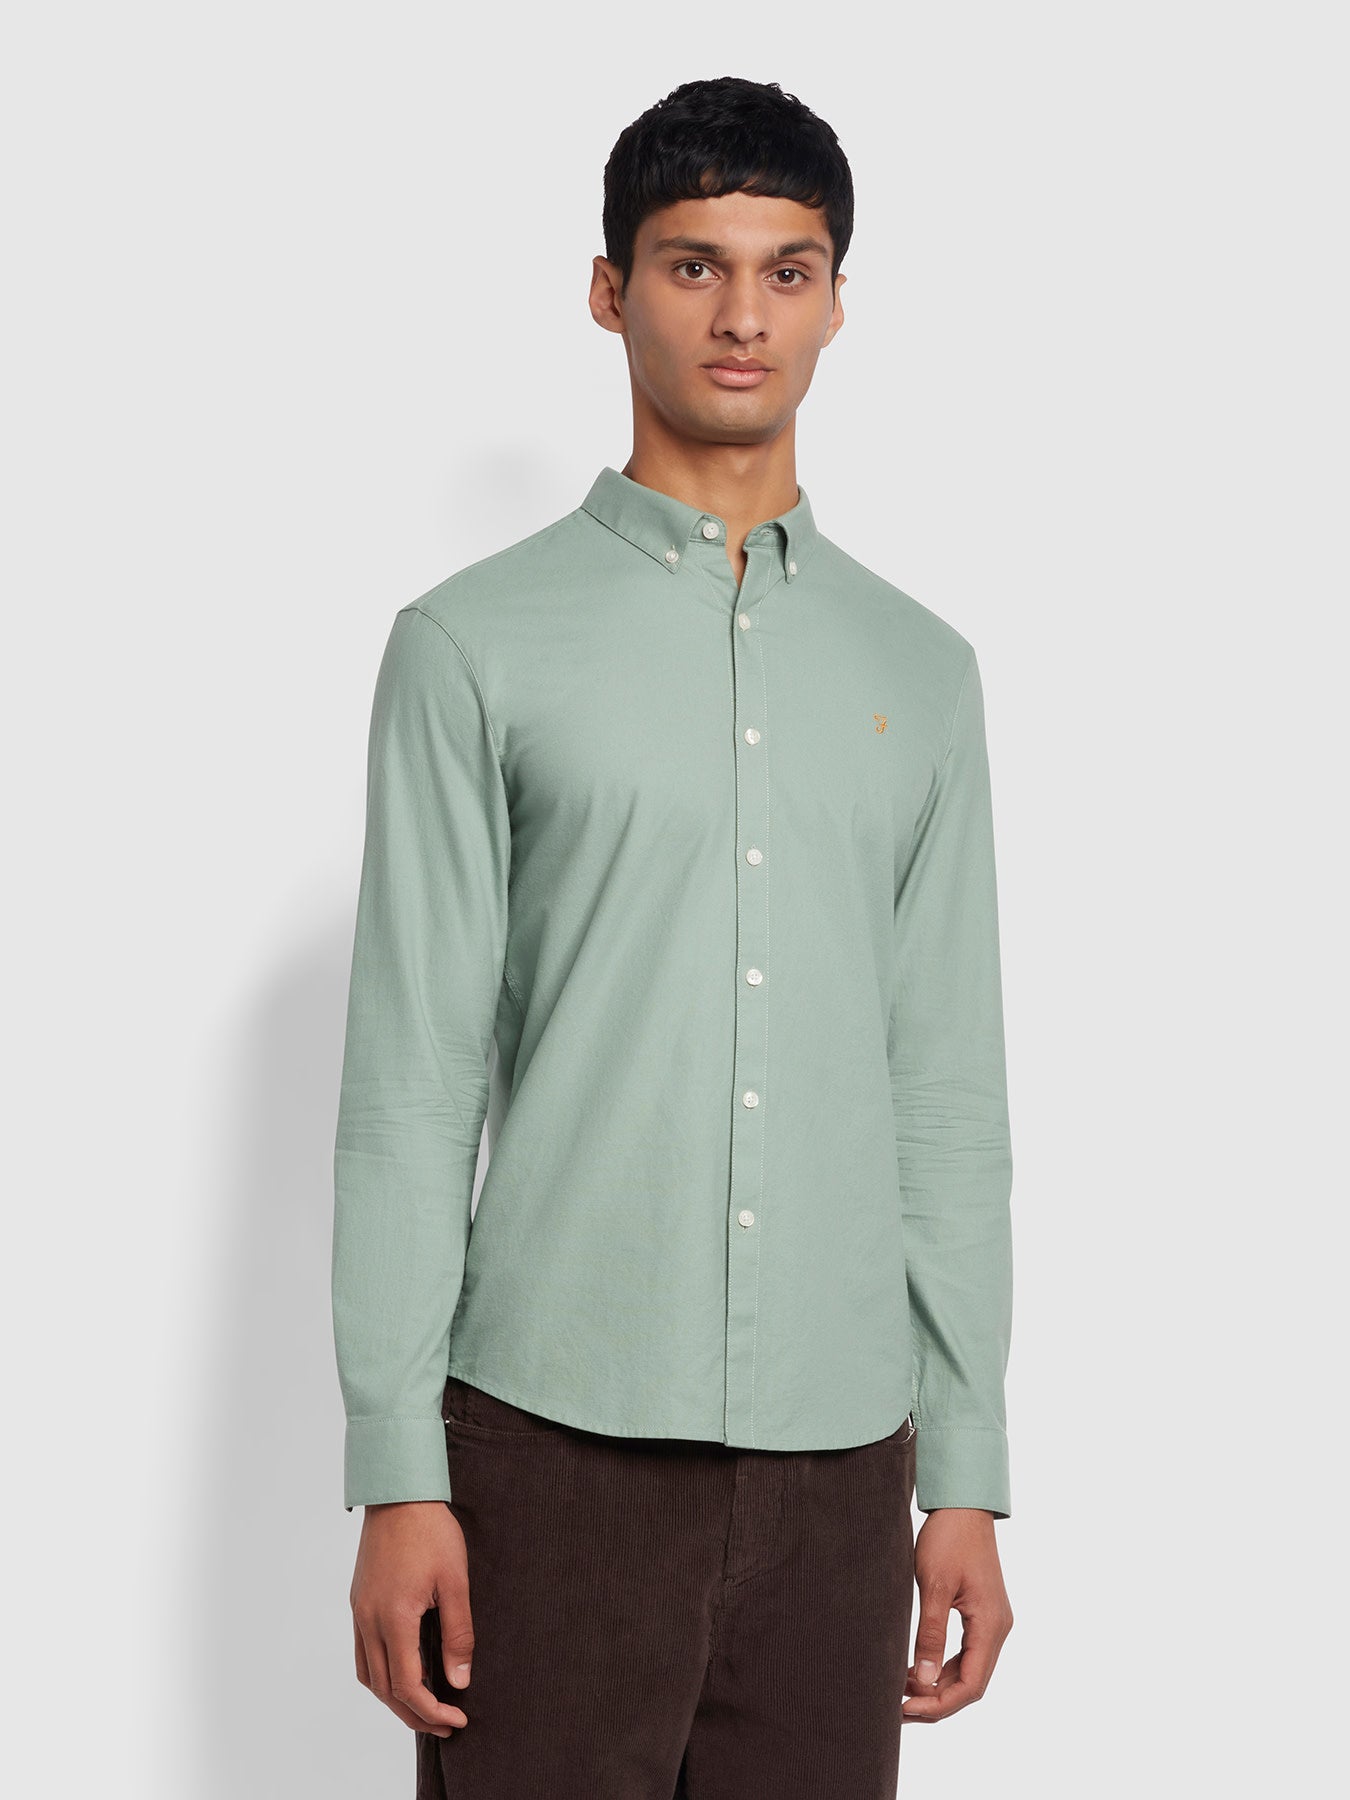 View Brewer Slim Fit Organic Cotton Oxford Shirt In Archive Green Sage information